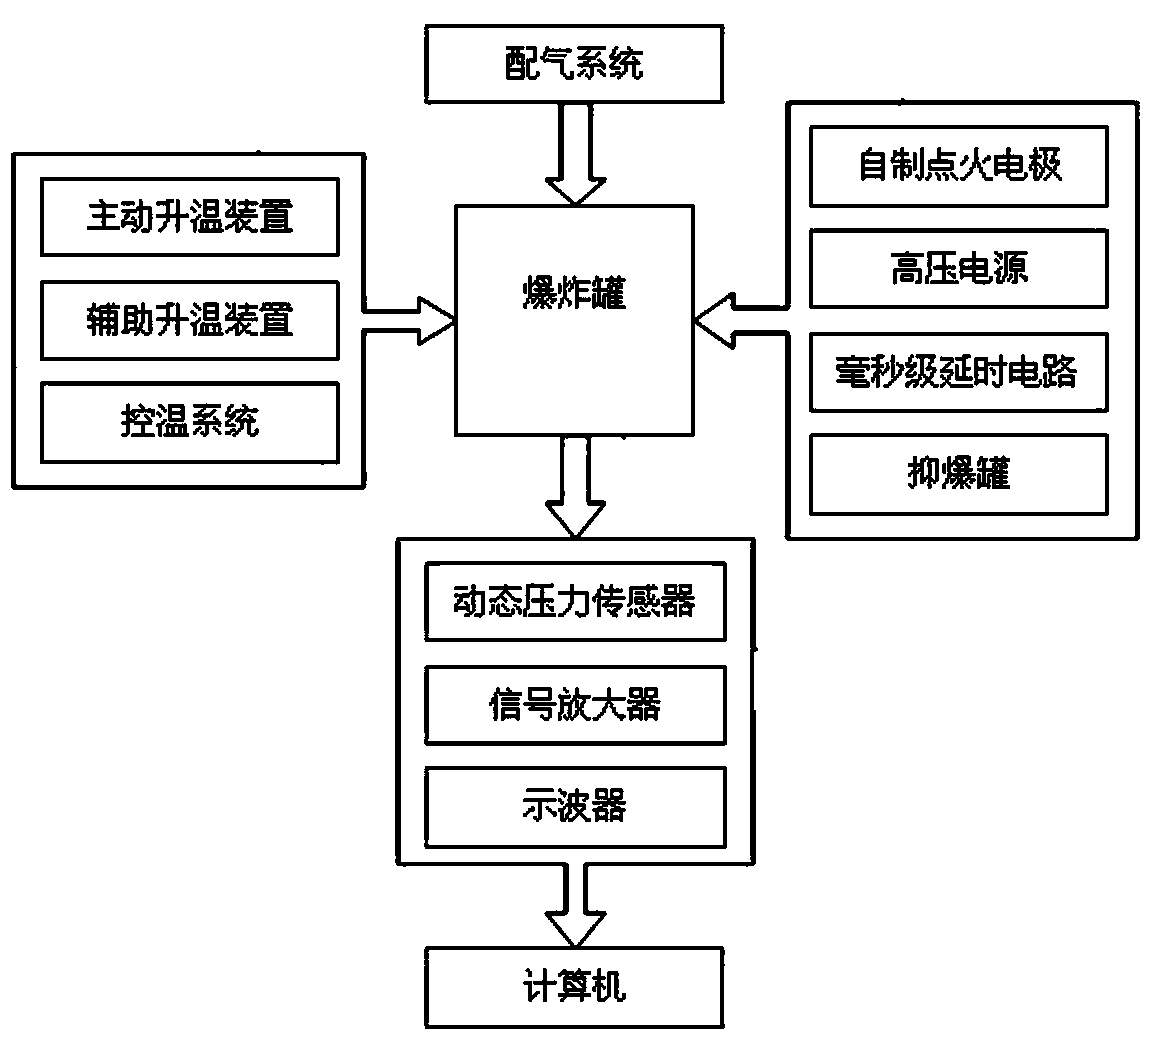 Combustible liquid vapor explosion and explosion suppression characteristic test system